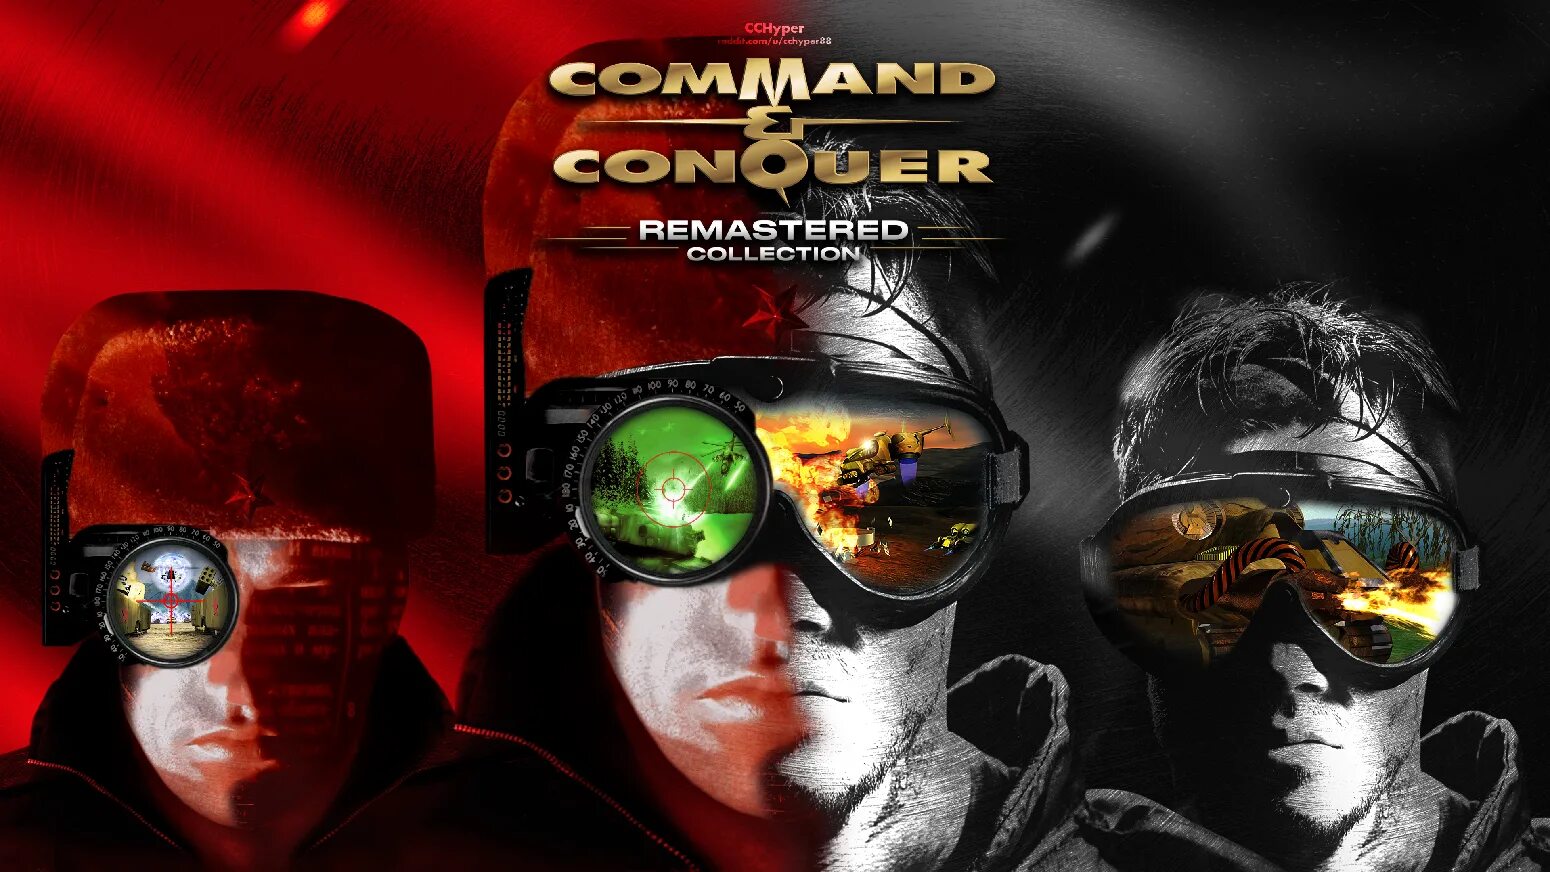 Command and Conquer Remastered. C C Remastered collection. Red Alert 1 Remastered.